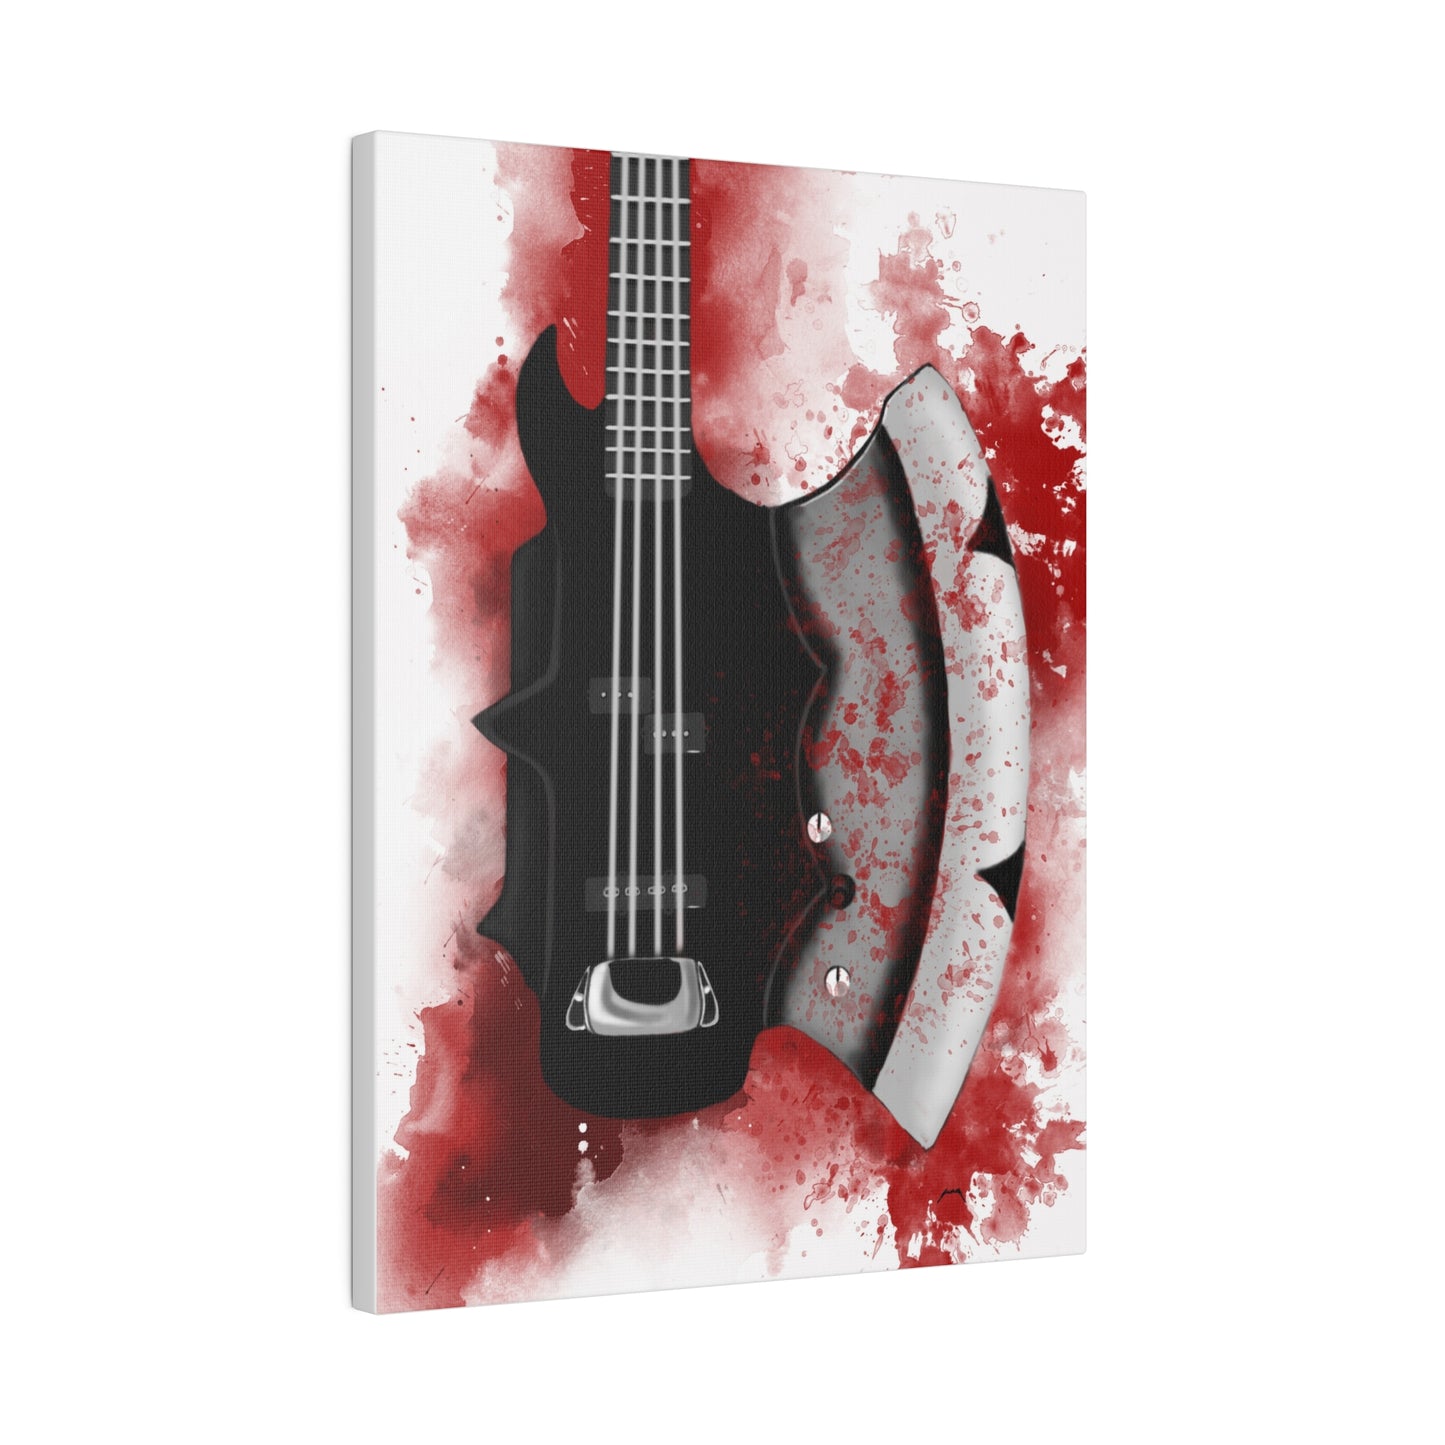 Digital painting of a bloody axe bass guitar printed on canvas